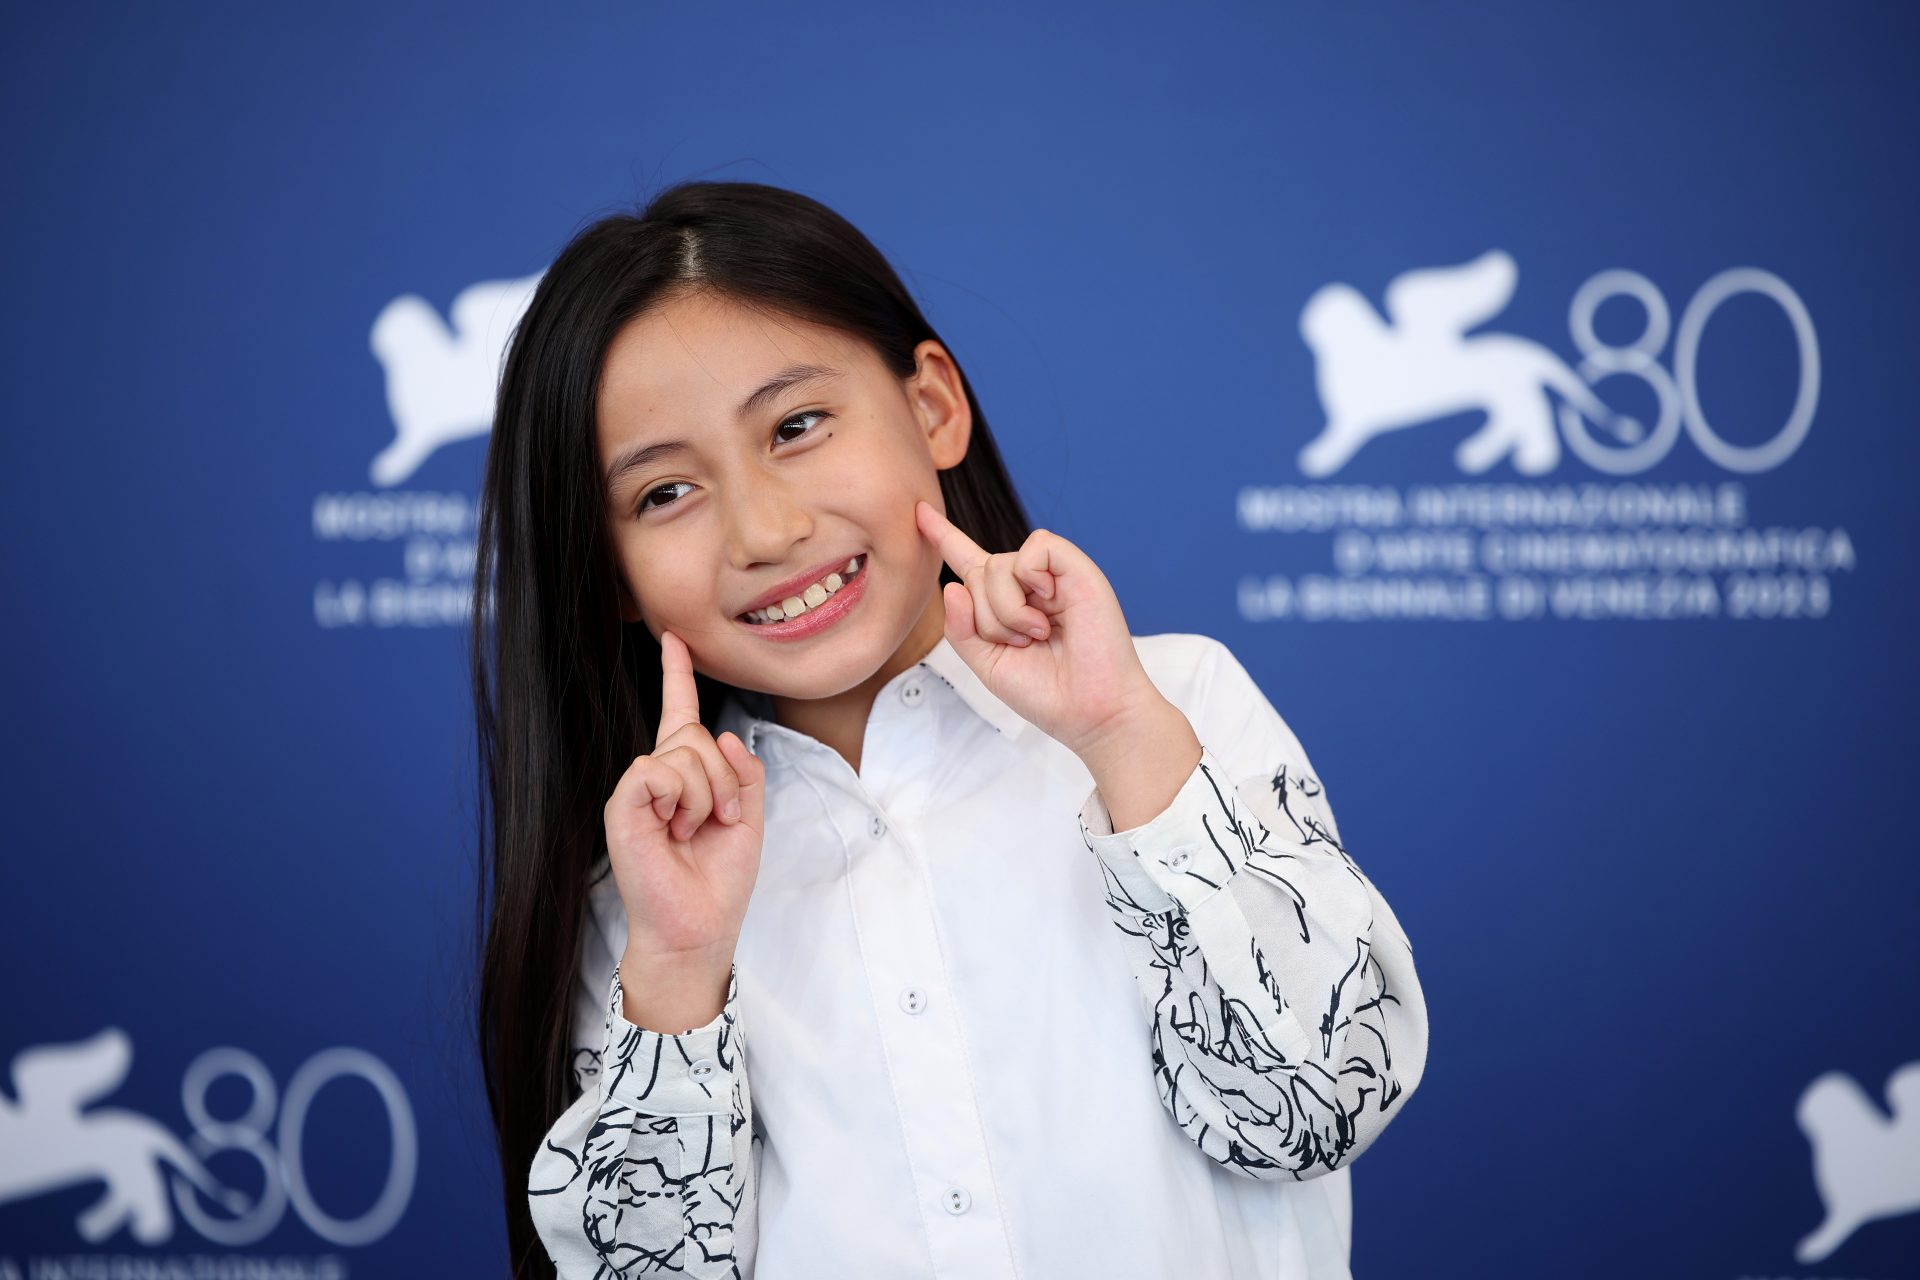 2023 in photos: Asian success at the Venice film festival